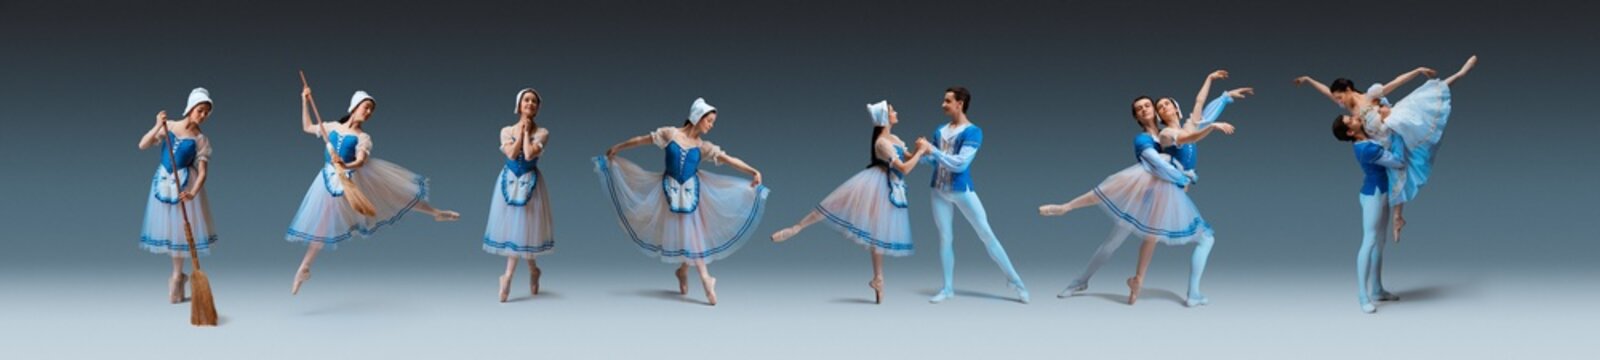 Composite image of portraits of ballet dancers couples in theater performance Cinderella isolated on gray background. Concept of art, beauty, aspiration, creativity